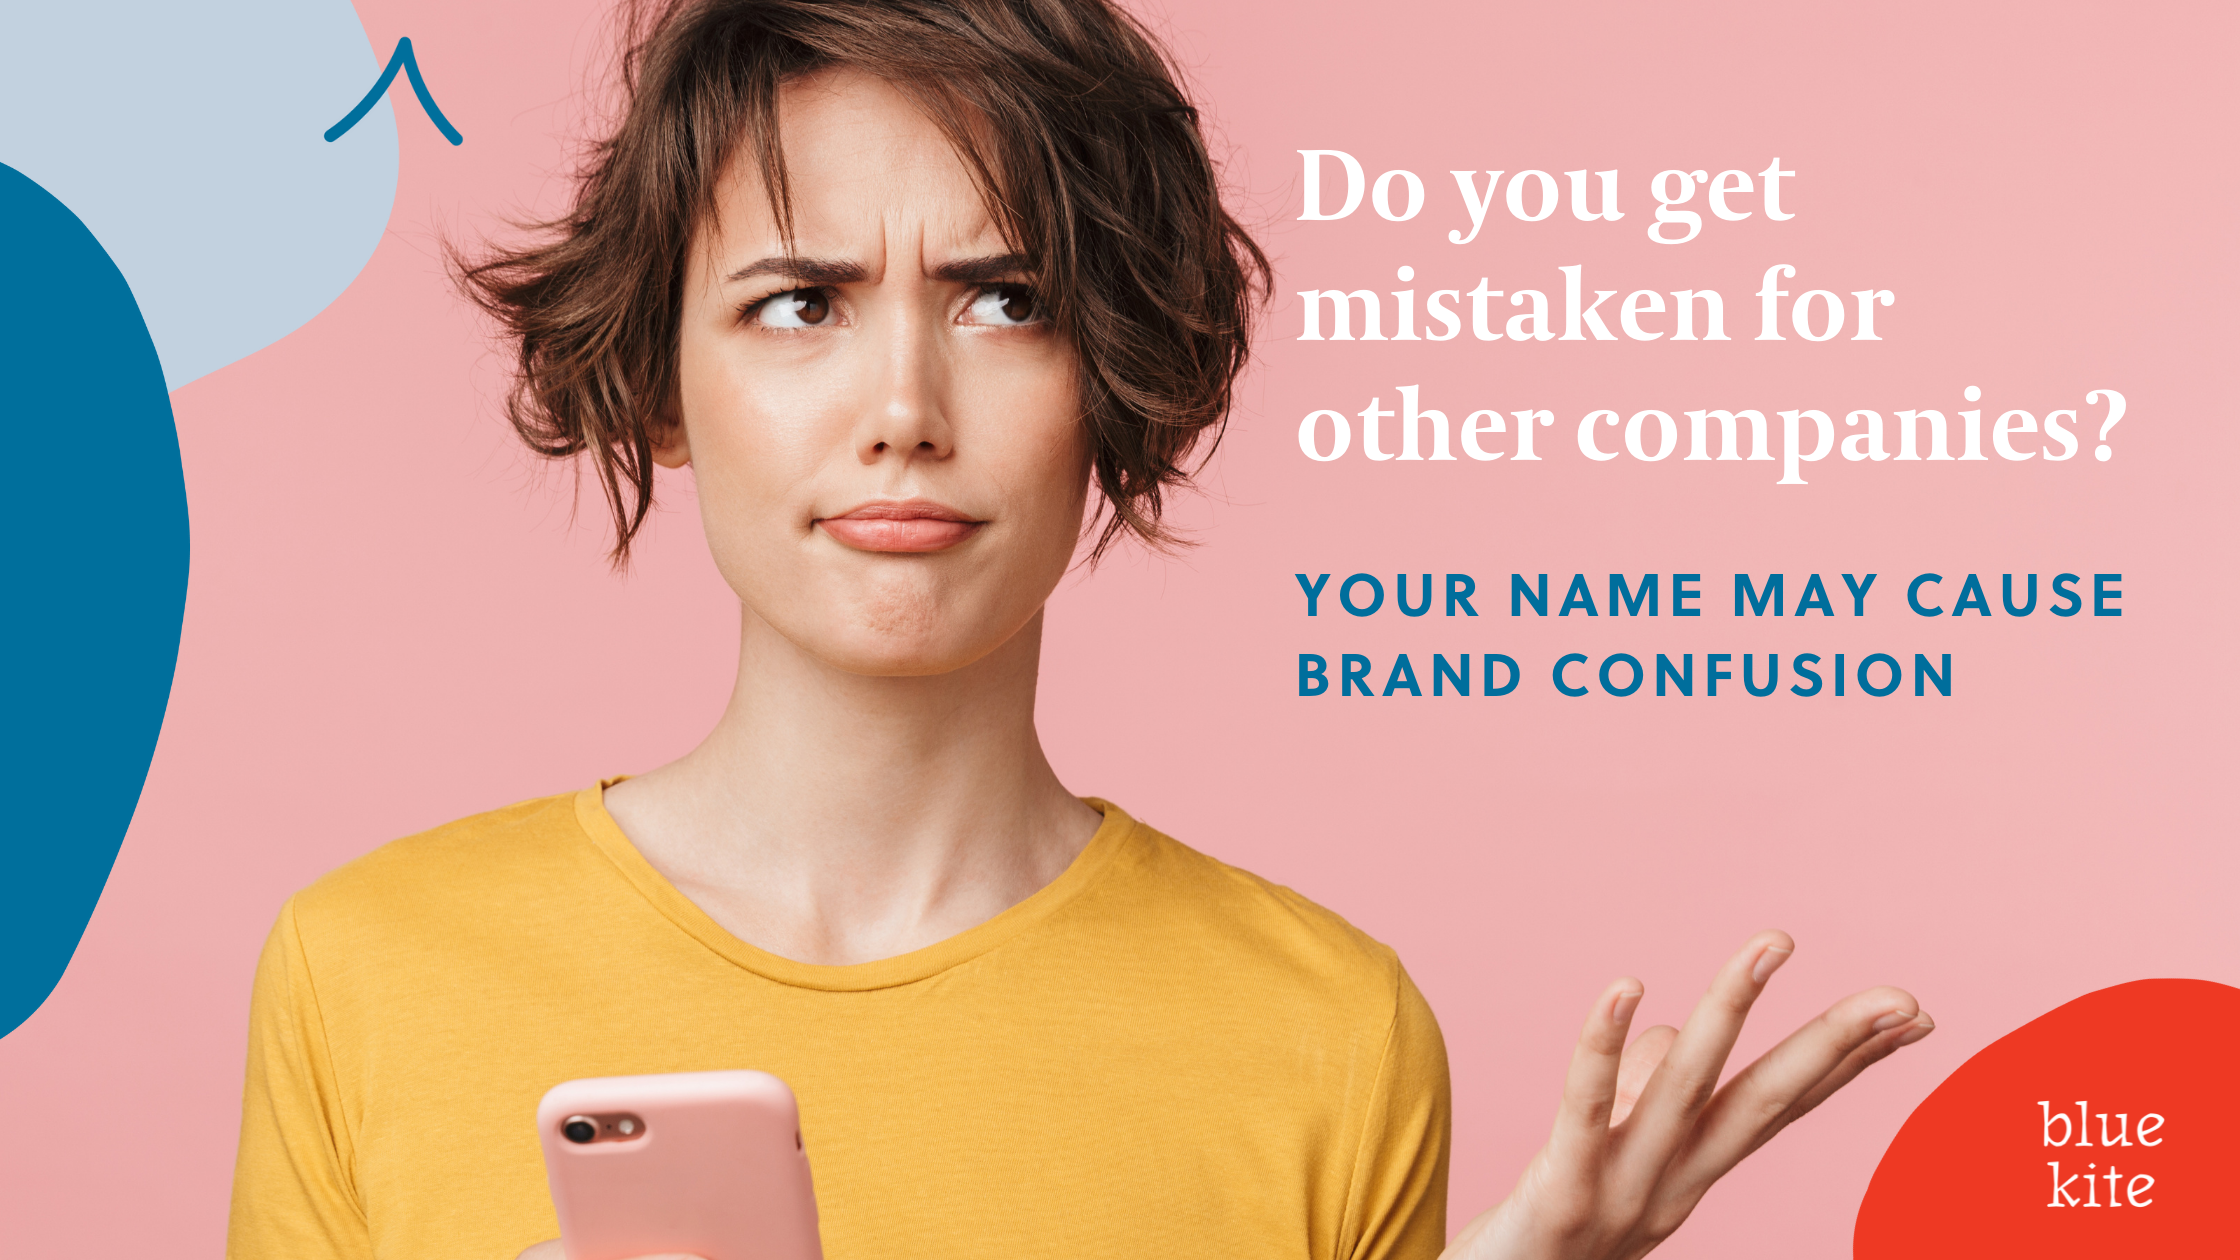 Confused woman - Your company name make cause brand confusion